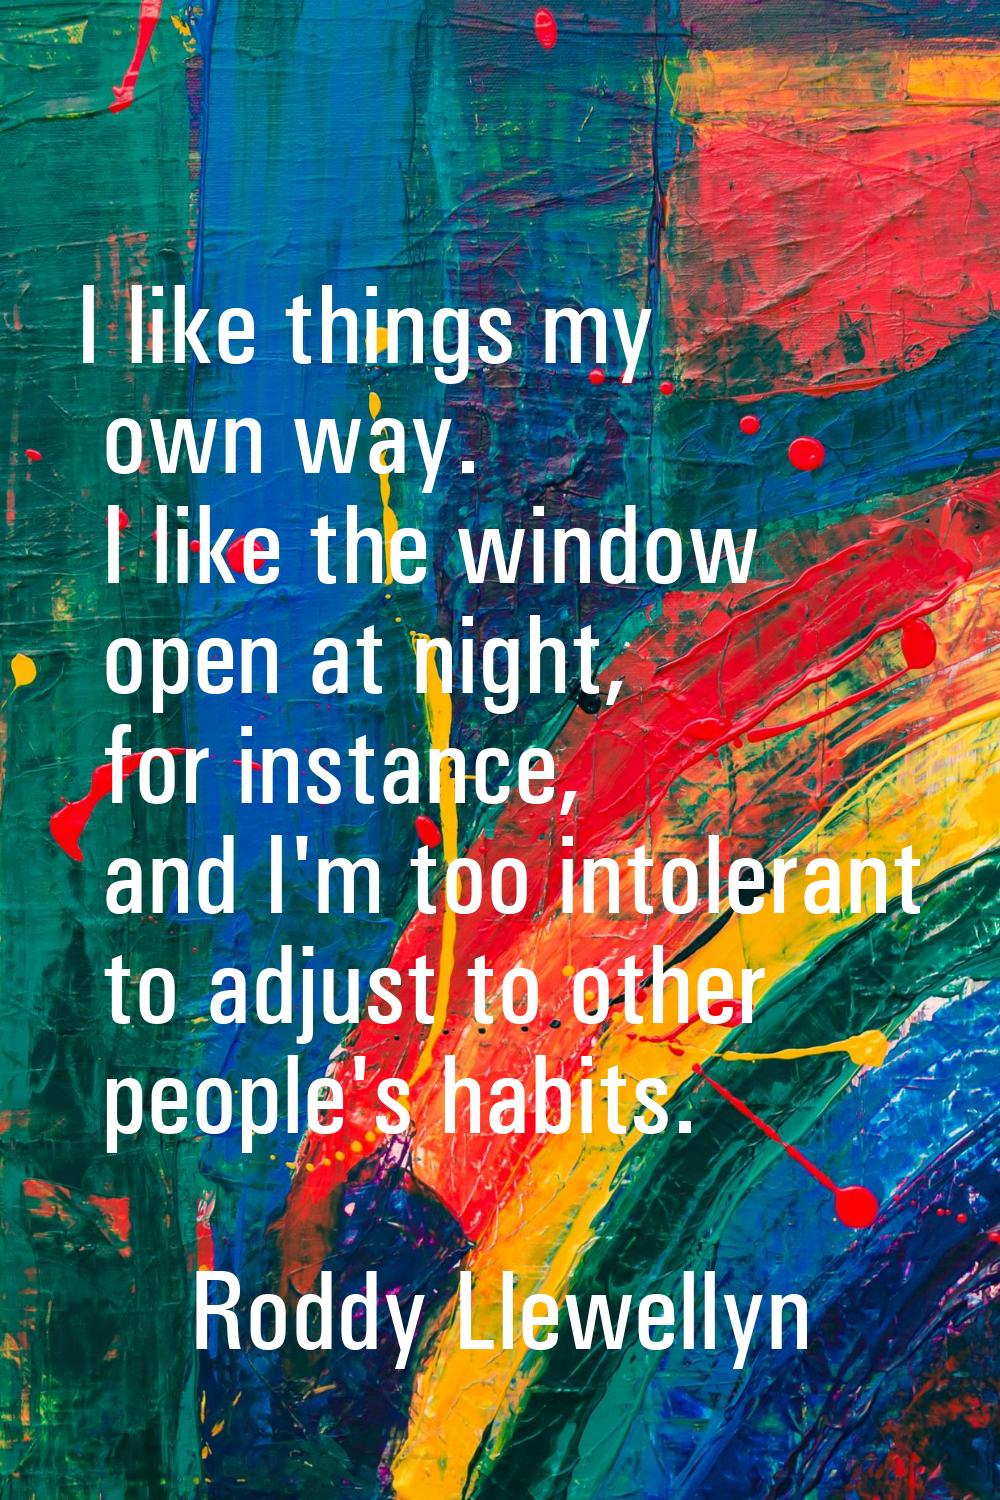 I like things my own way. I like the window open at night, for instance, and I'm too intolerant to 